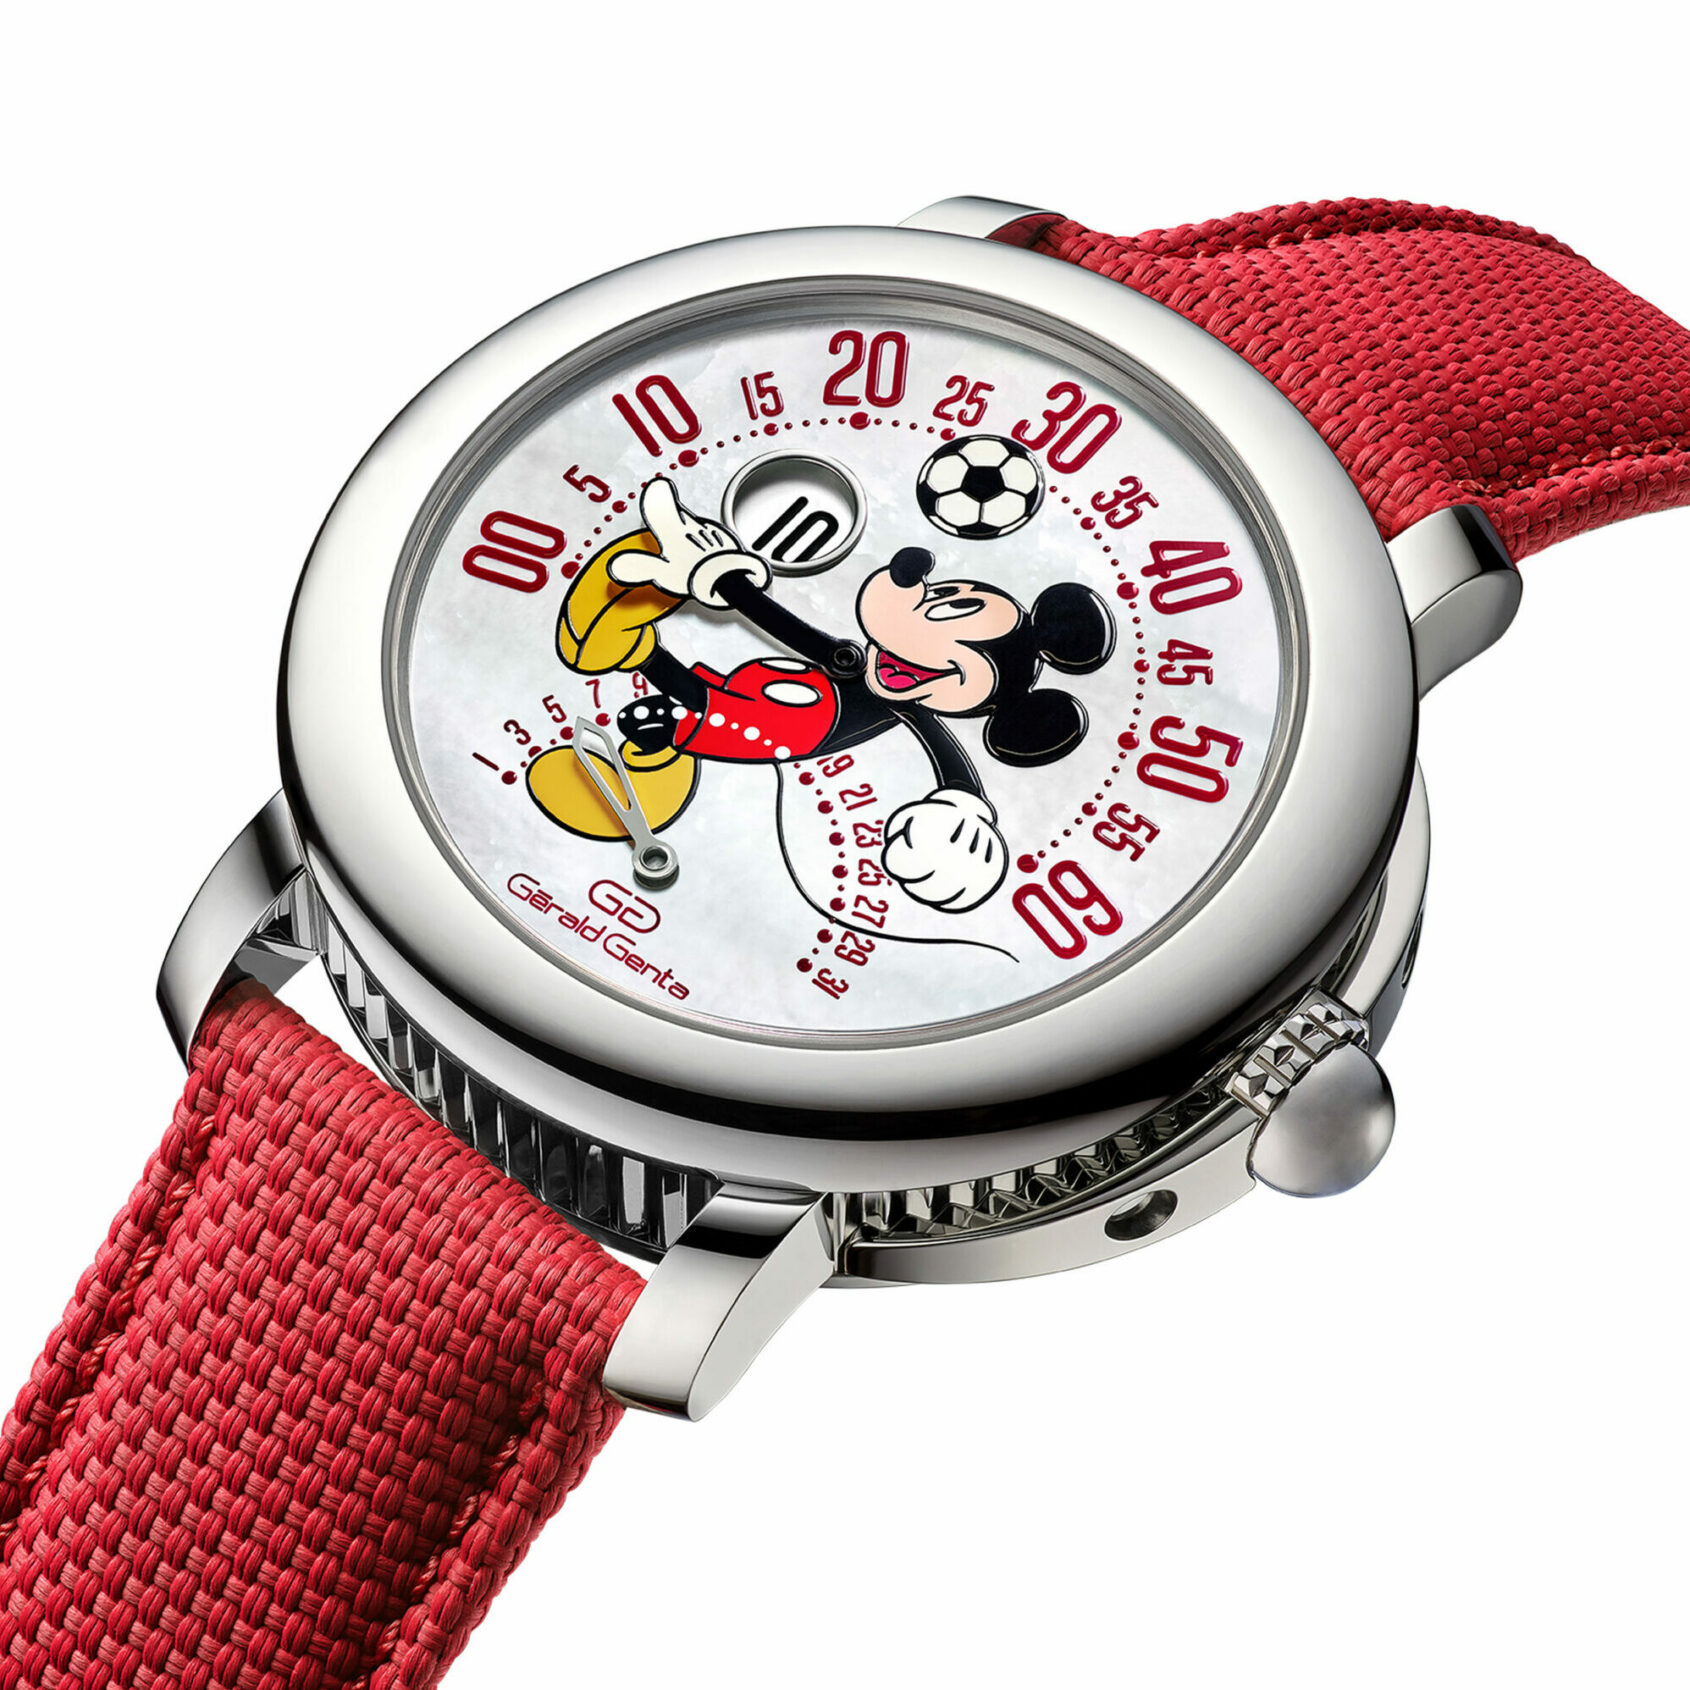 This new Gerald Genta watch displays Mickey Mouse playing football ahead of the World Cup